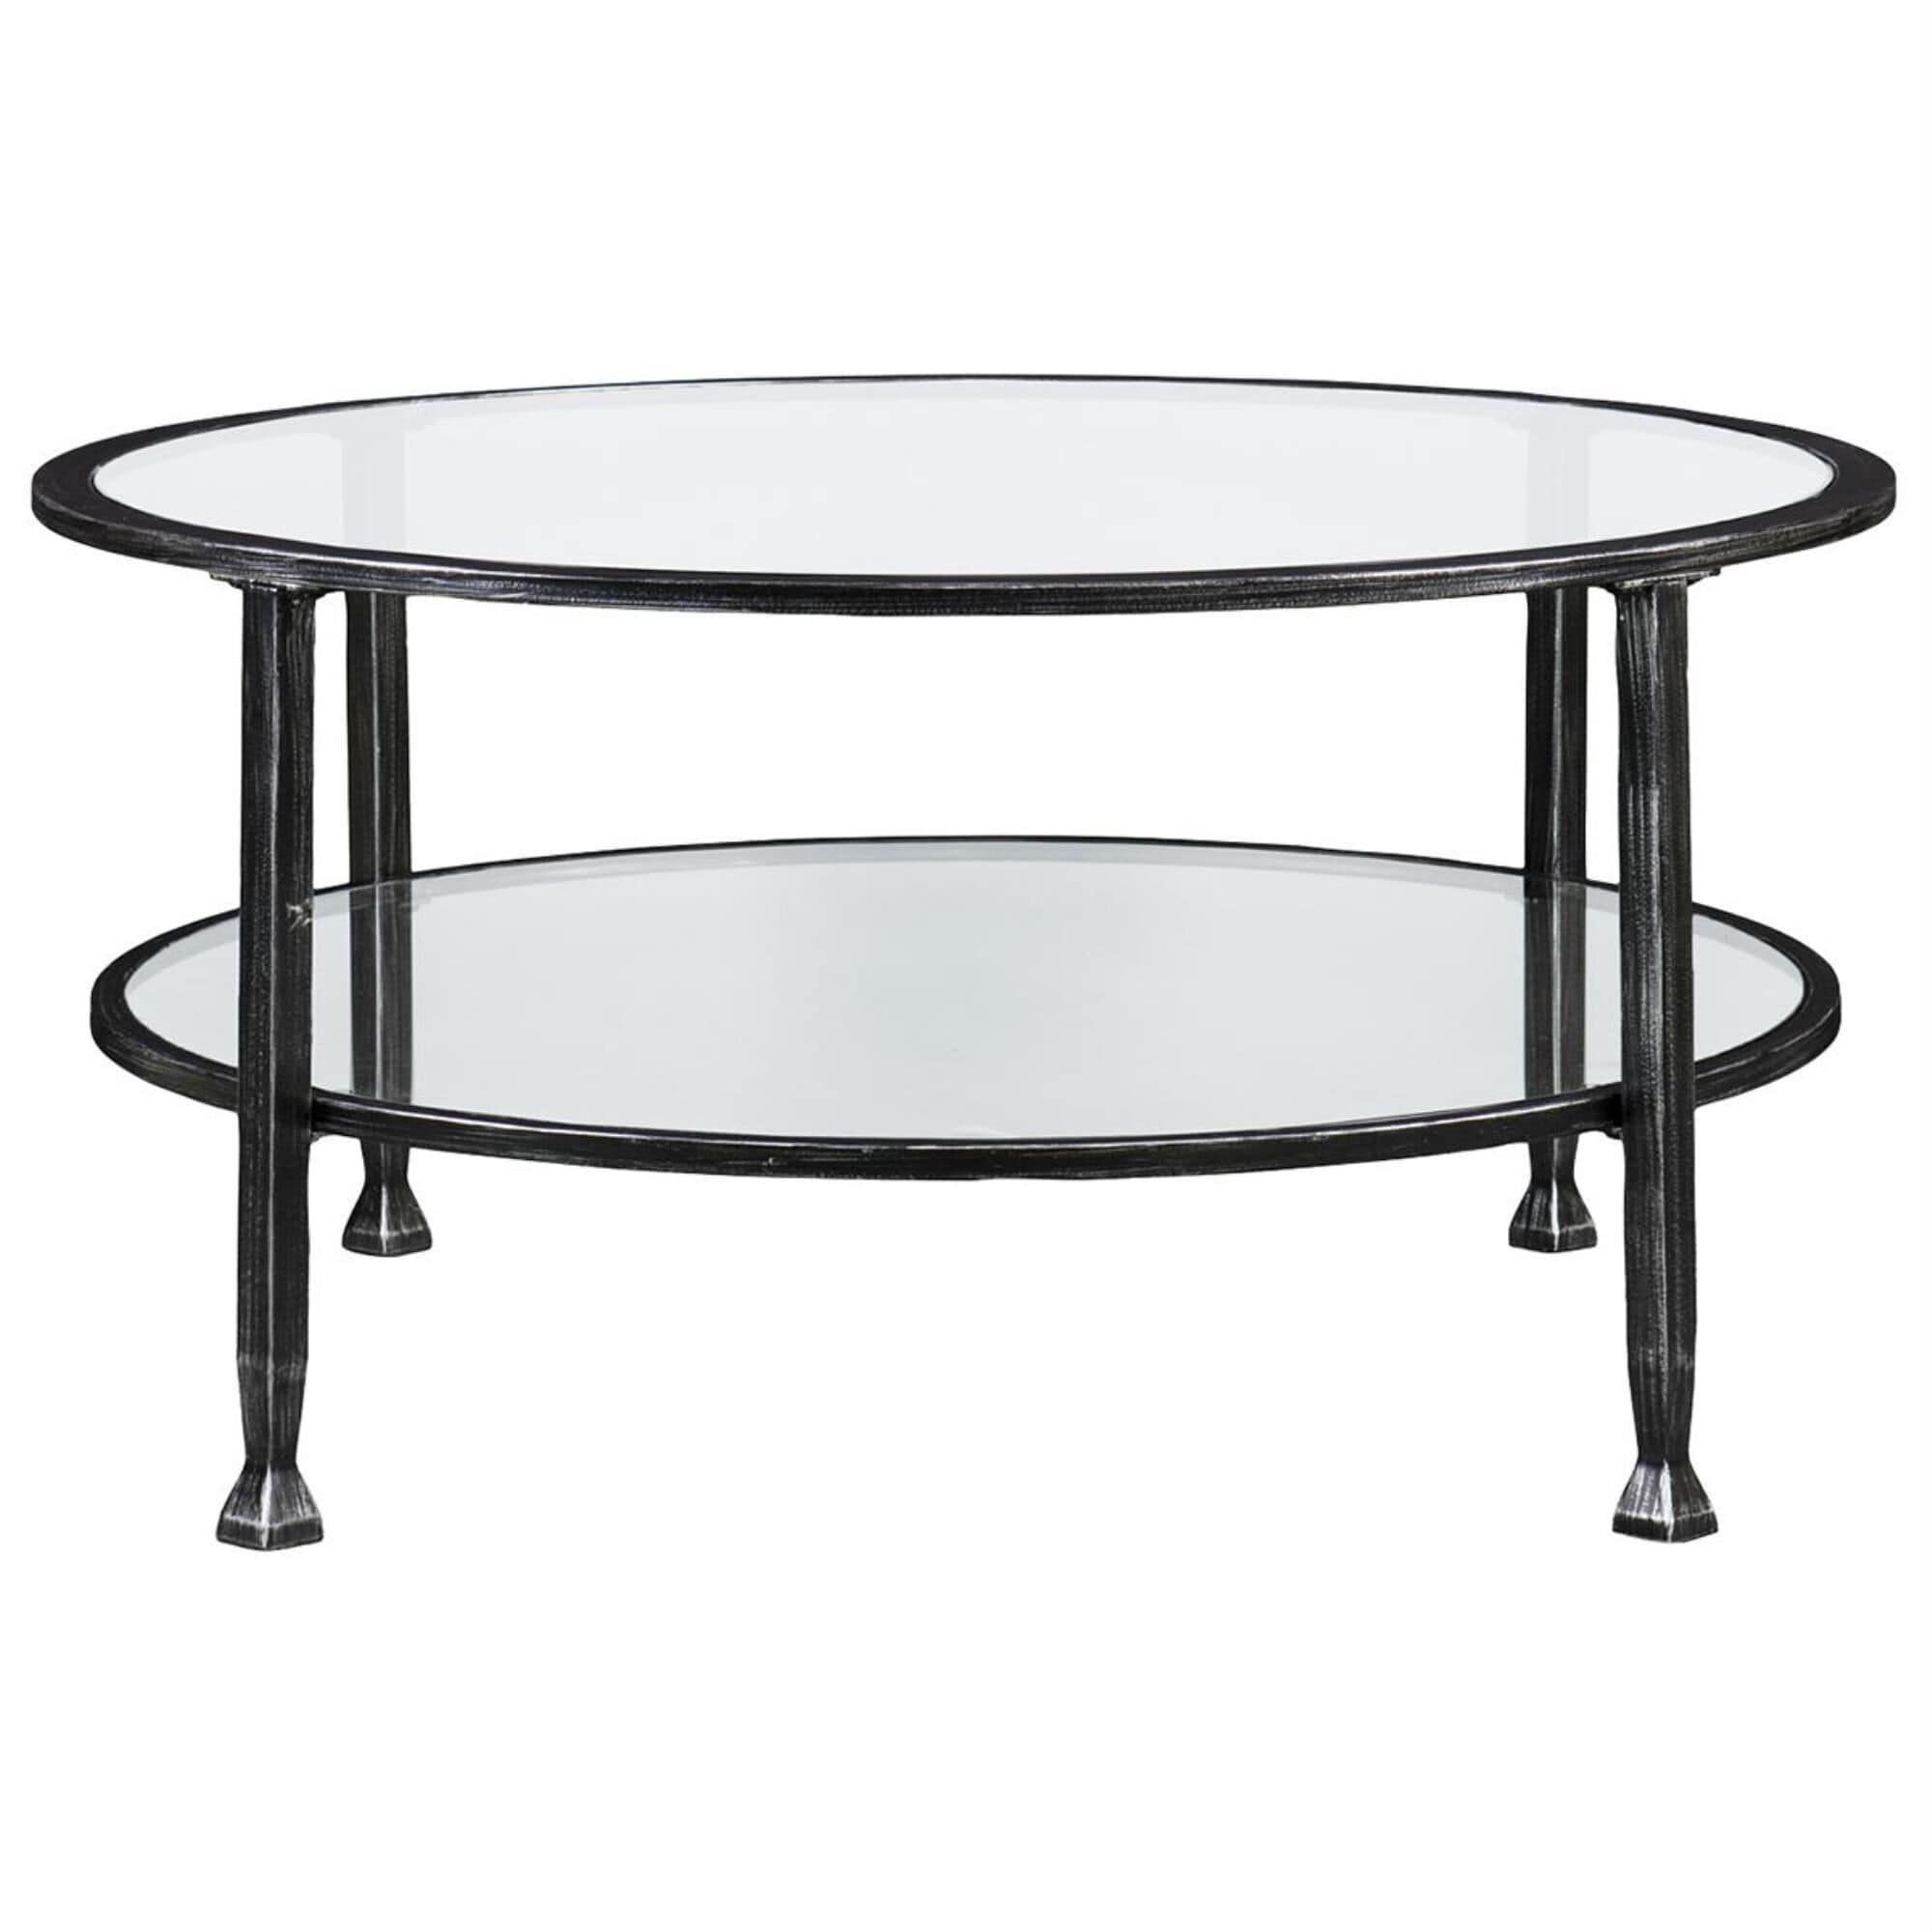 Southern Enterprises Jaymes Round Coffee Table In Distressed Black And Regarding Southern Enterprises Larksmill Coffee Tables (Gallery 9 of 20)